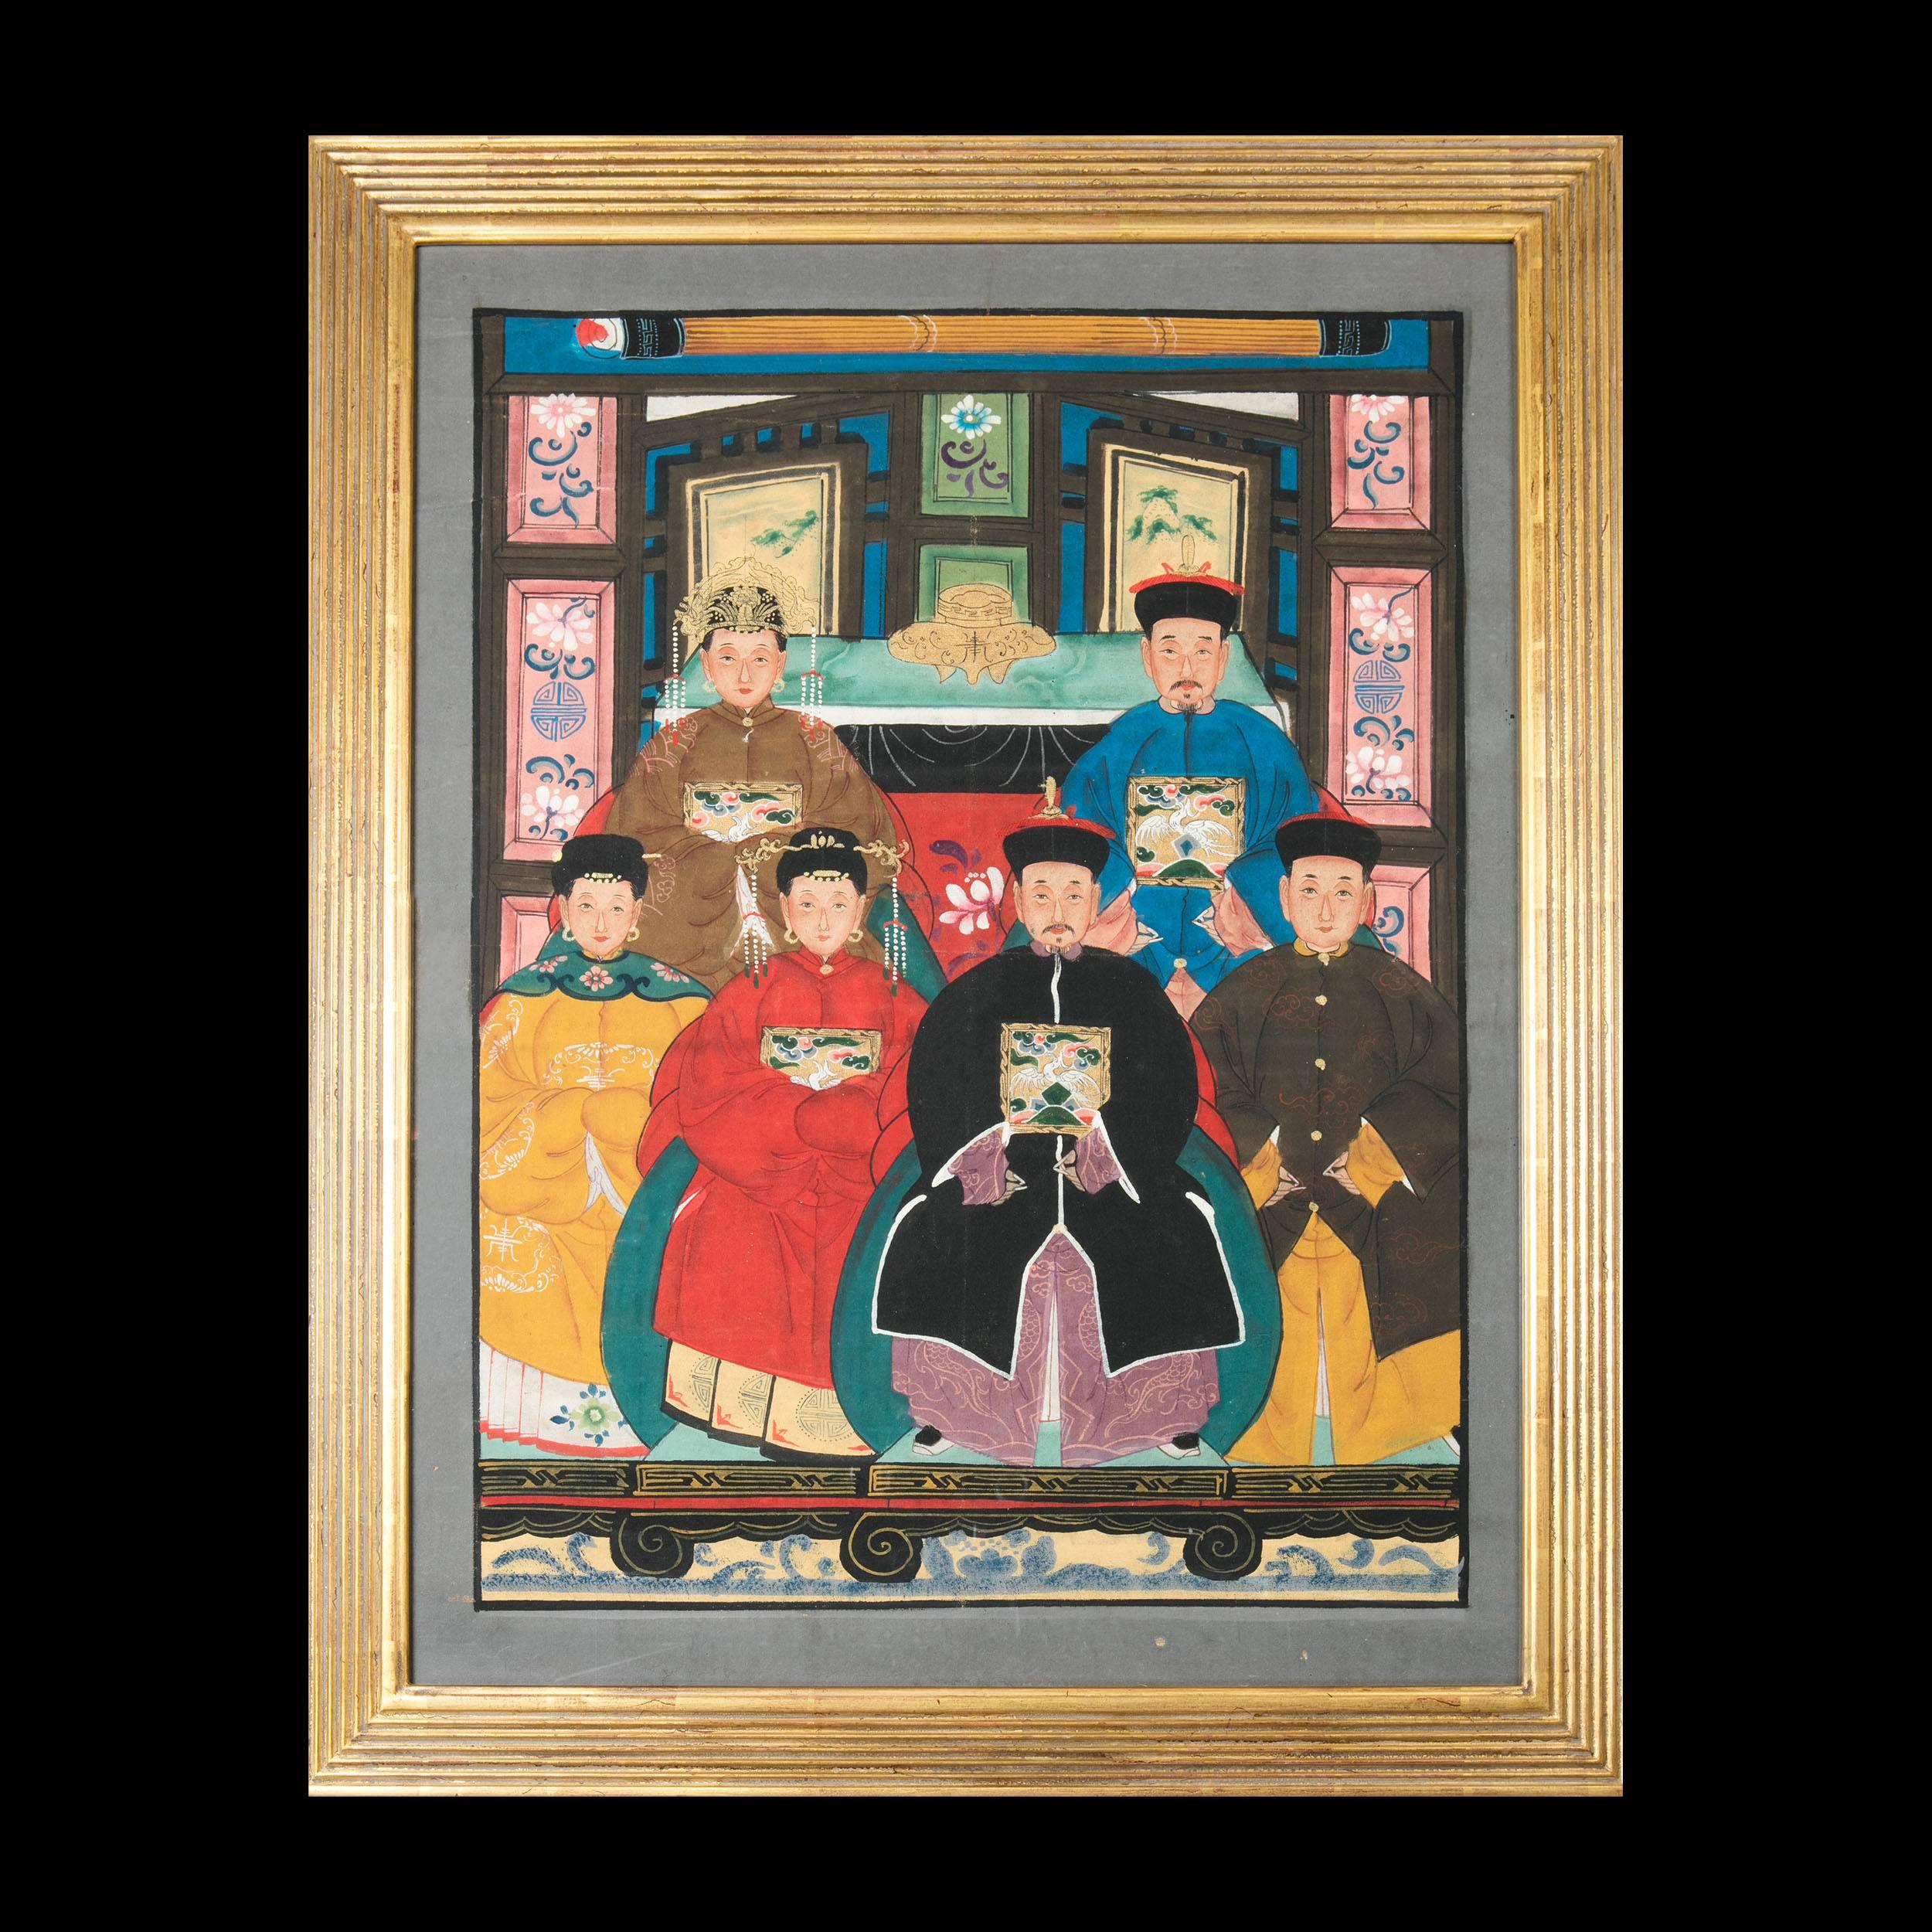 A set of three late 19th century ancestor portraits painted on canvas showing the imperial family with tables decorated with vases.